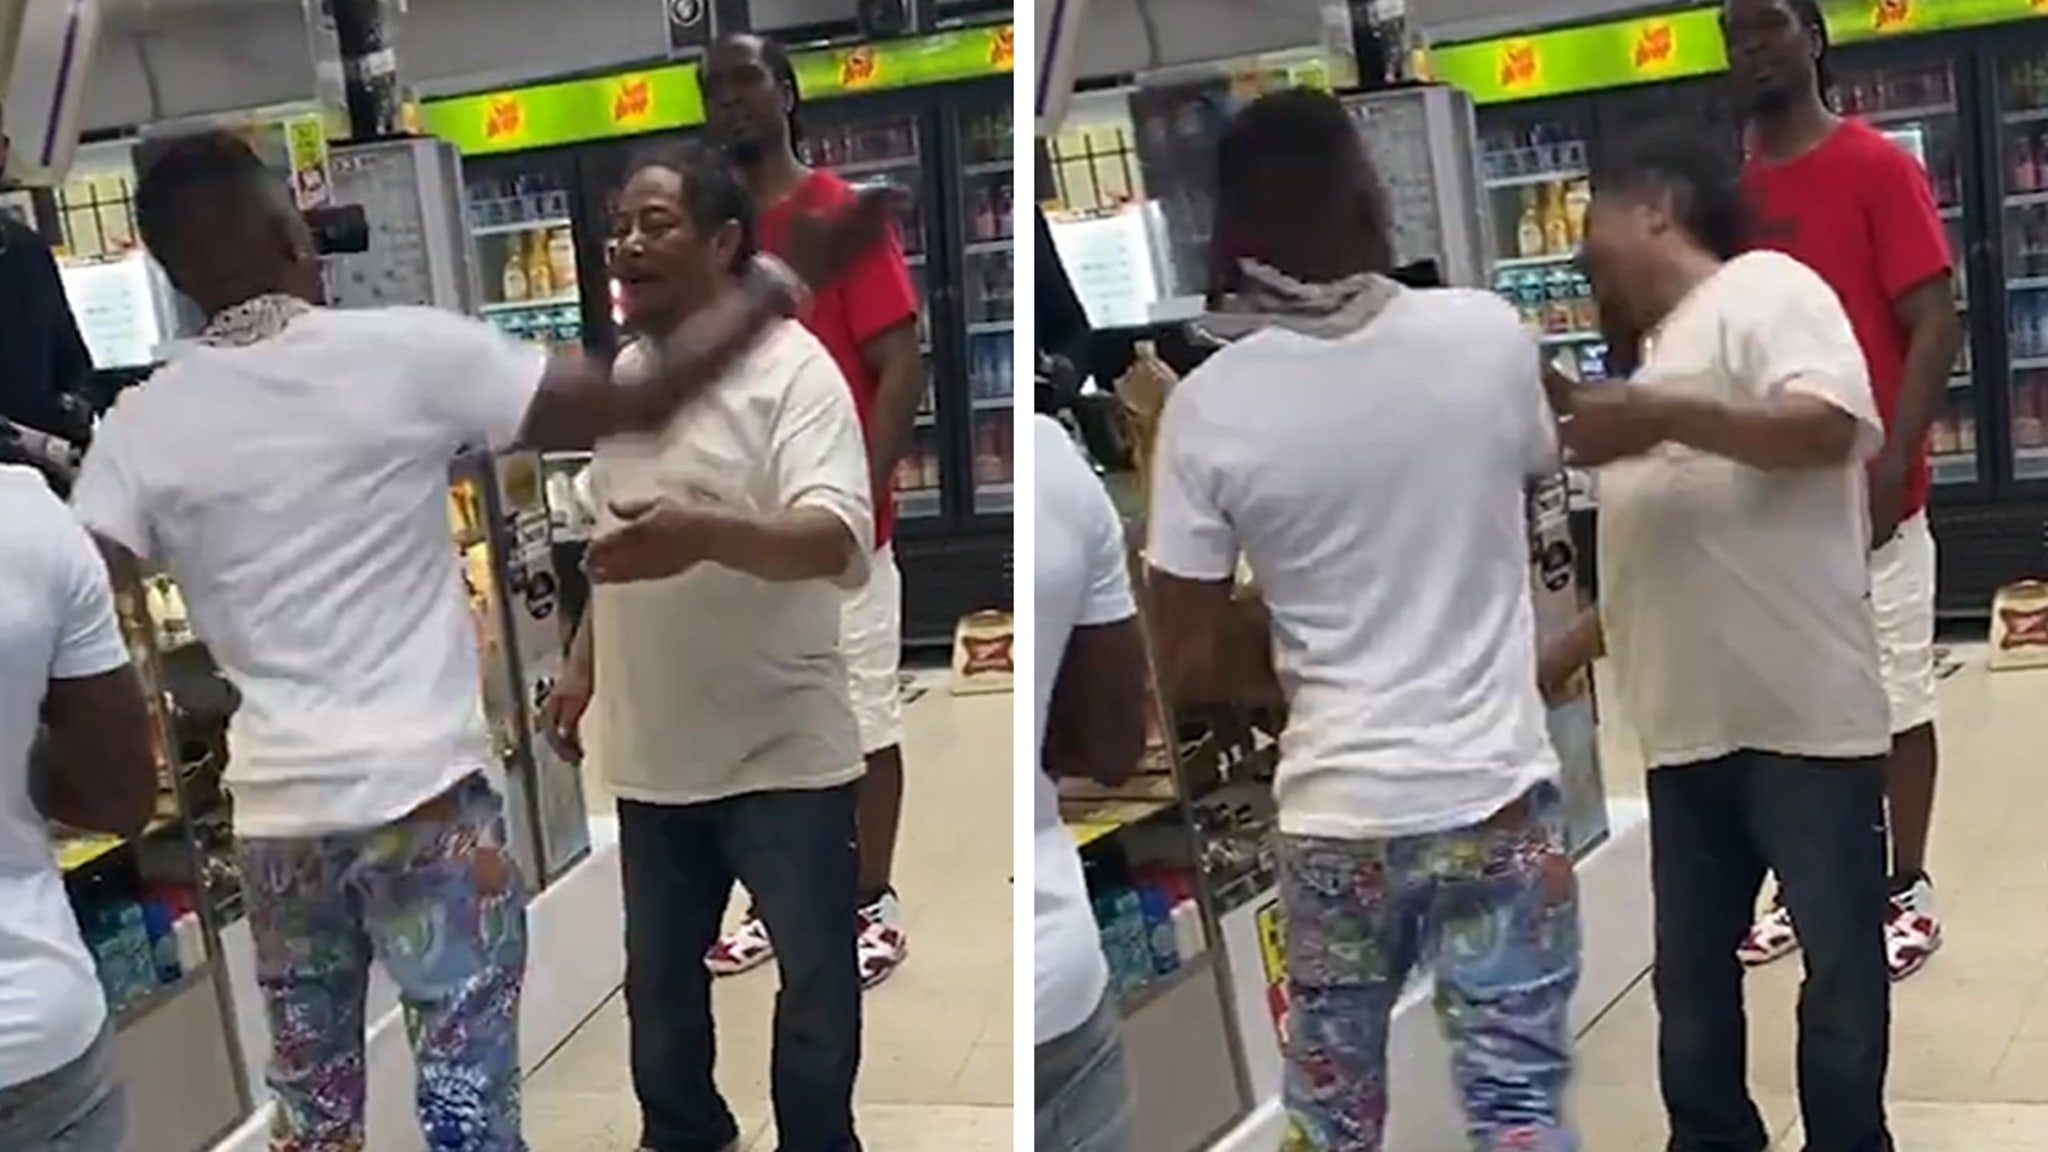 Boosie pays a guy $ 500 to slap him for a video clip